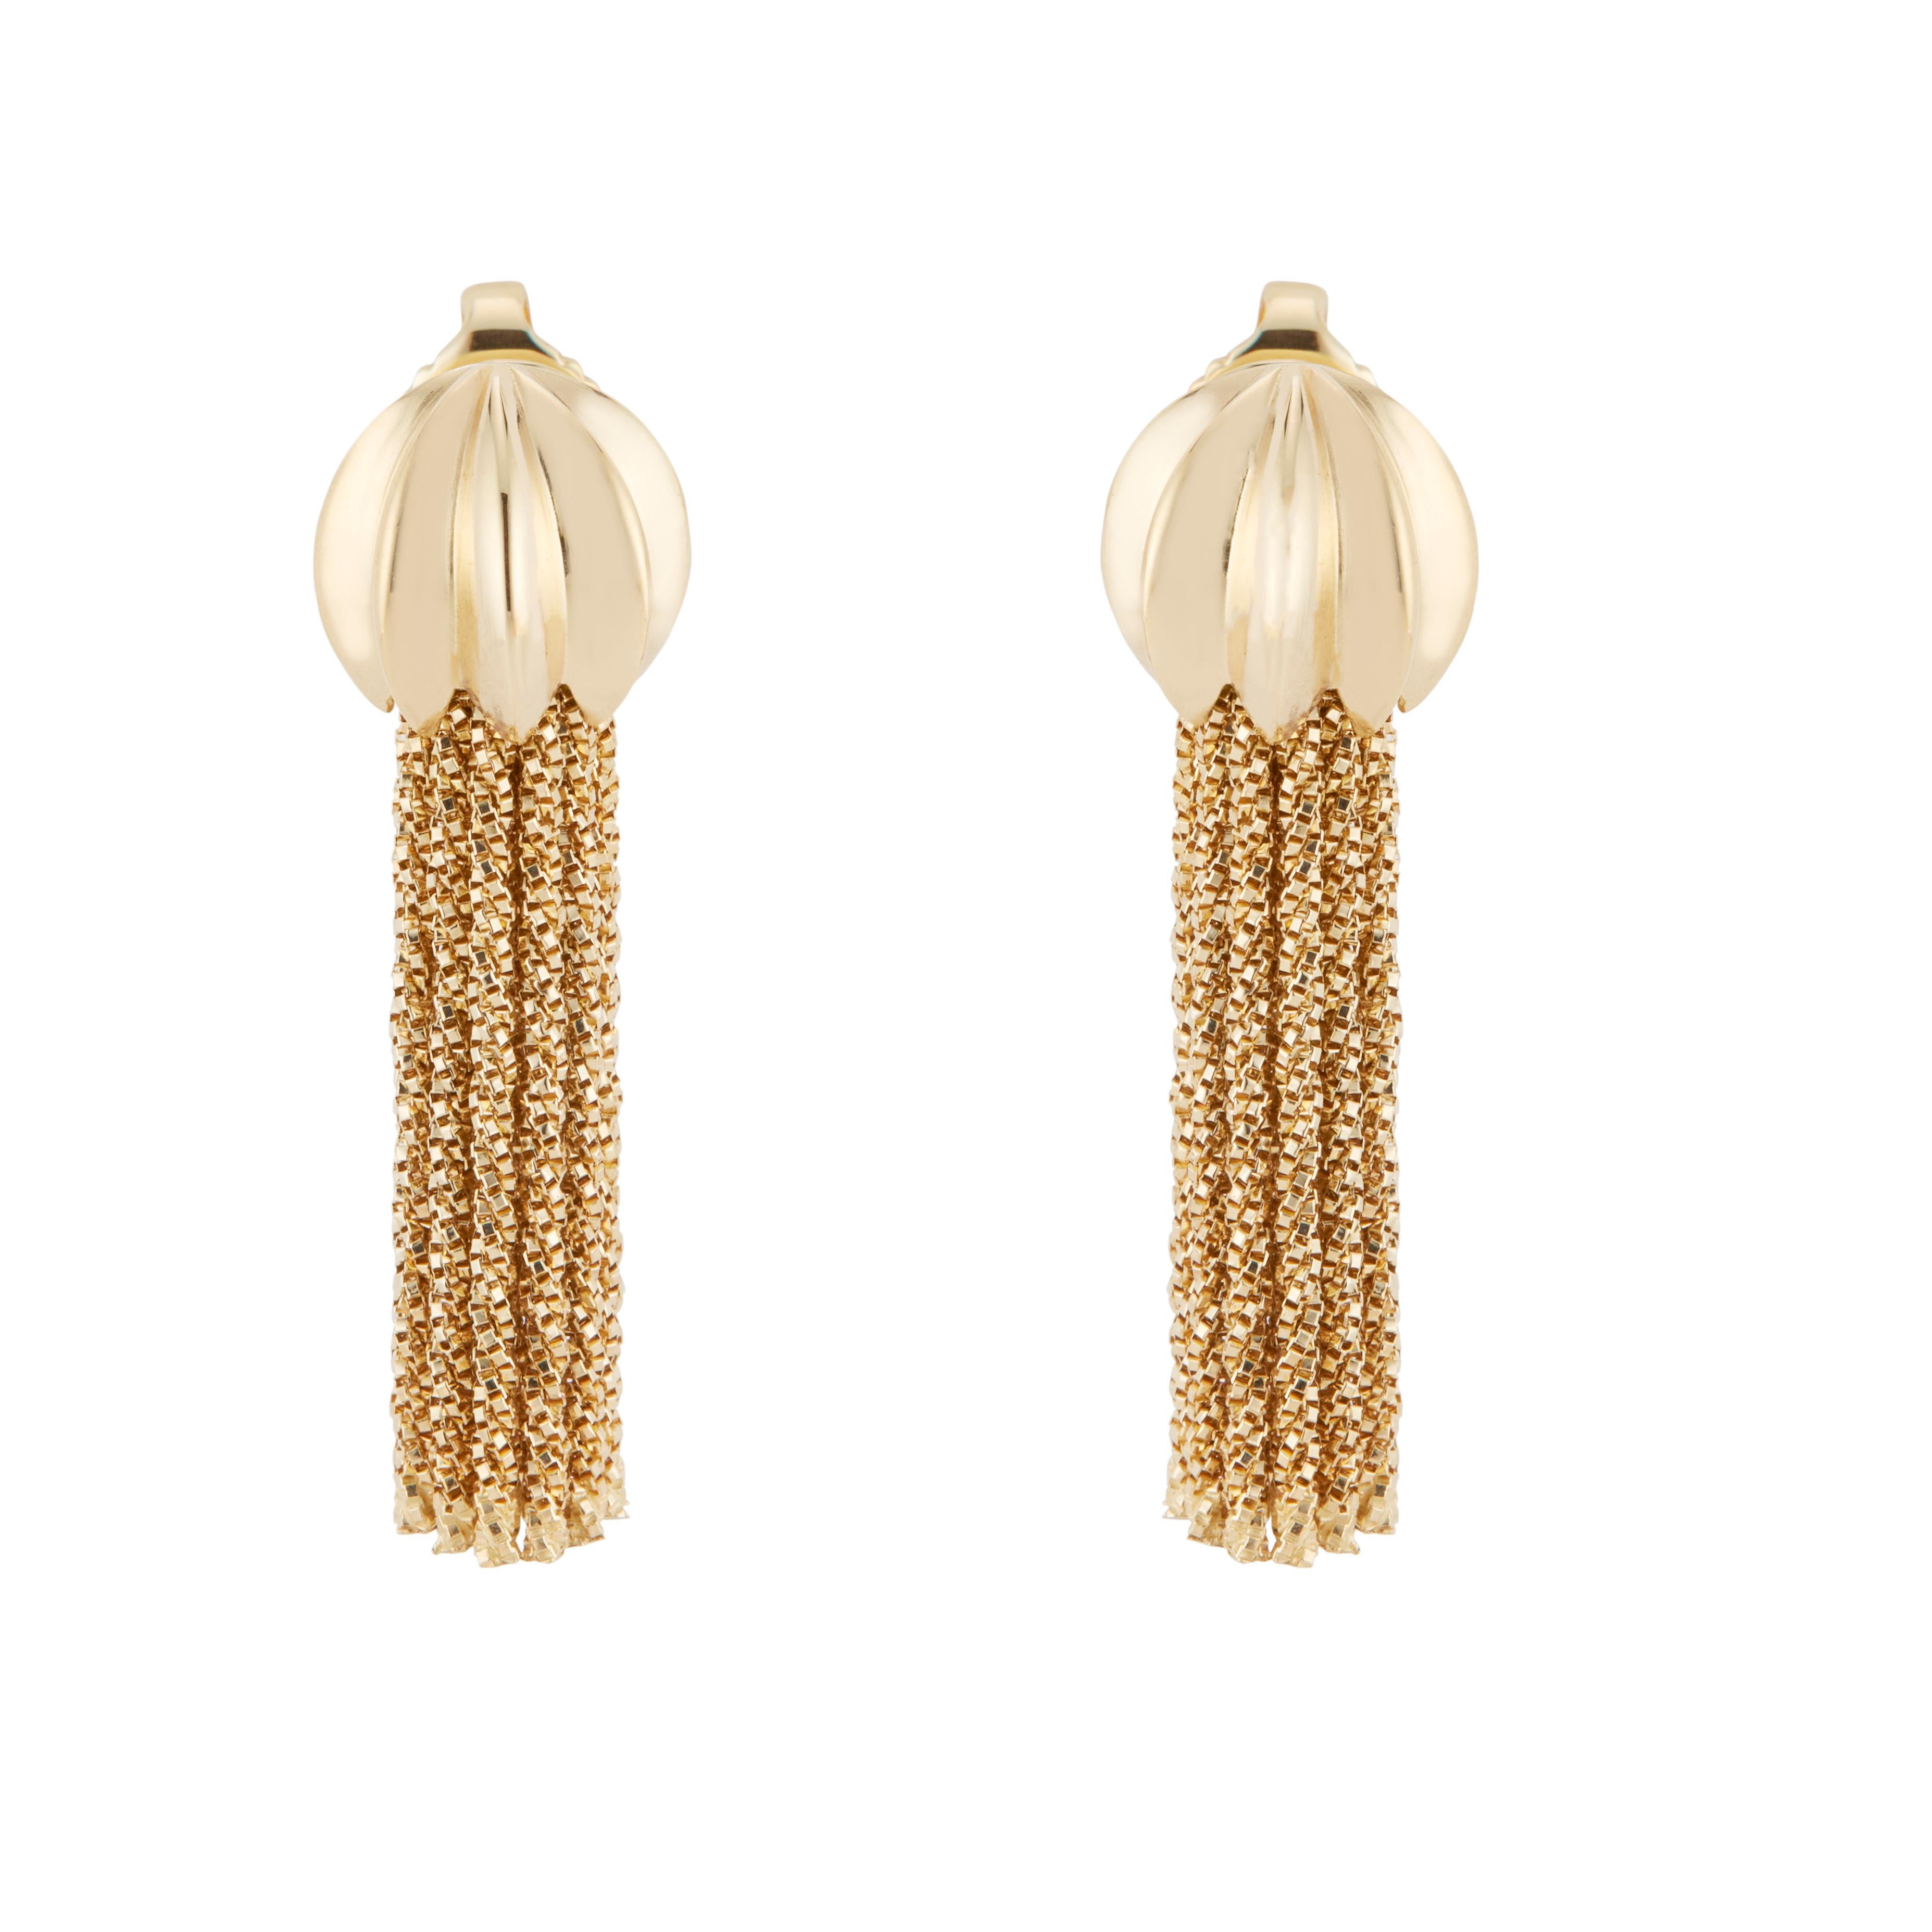 Solid 18k yellow gold tassel dangle earrings from the designer Yuri Icihihashi. 1.14 inches in length. 

18k yellow gold 
Stamped: 750 18k
Hallmark: YURI
10.8 grams
Top to bottom: 30.0mm or 1.14 Inch
Width: 9mm or 1/3 Inch
Depth or thickness: 5.8mm
